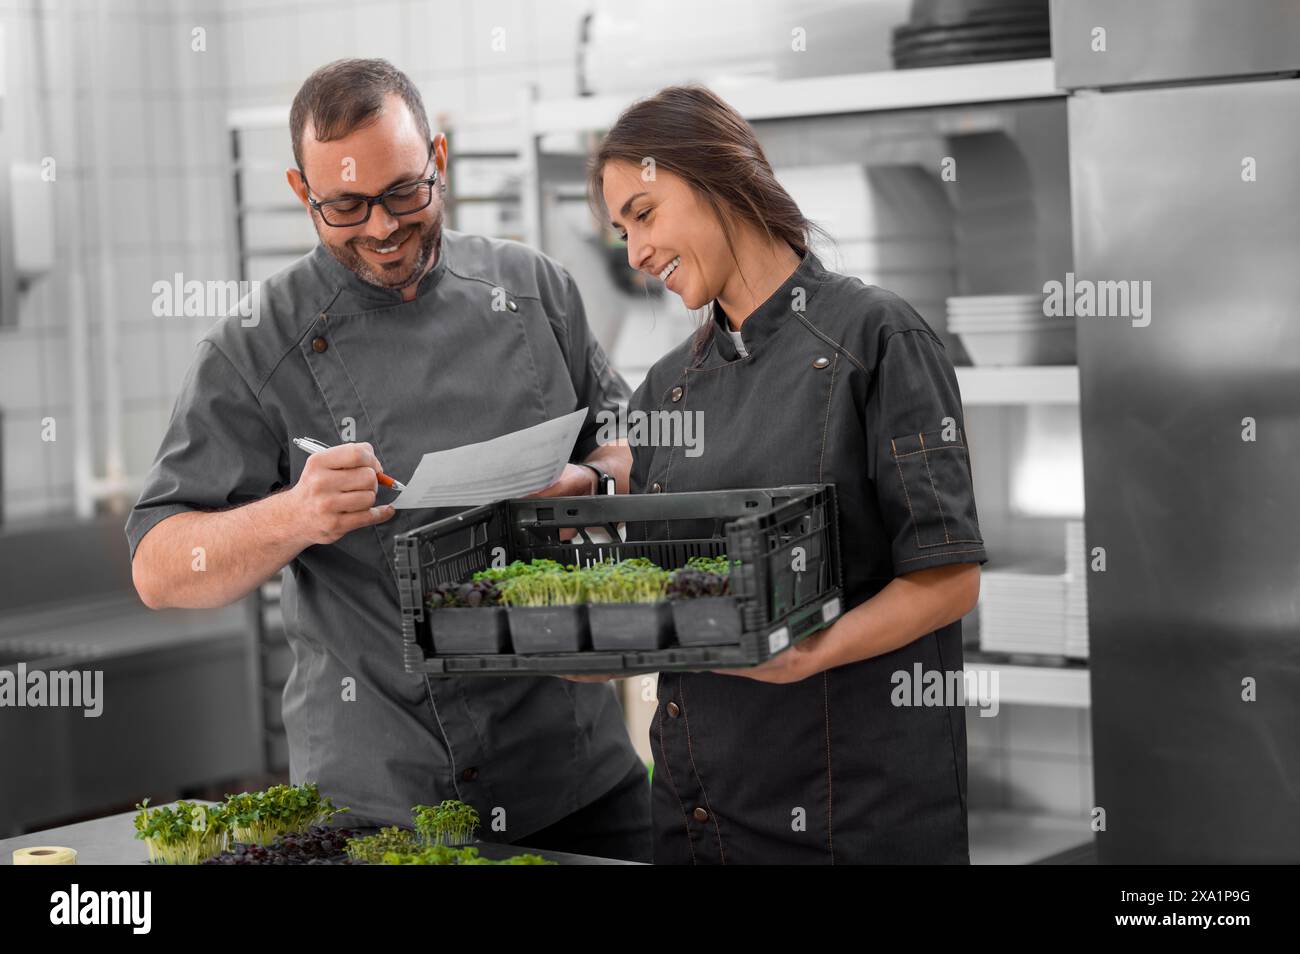 Professional cooks man and woman holding microgreen in small boxes in restaurant kitchen Stock Photo